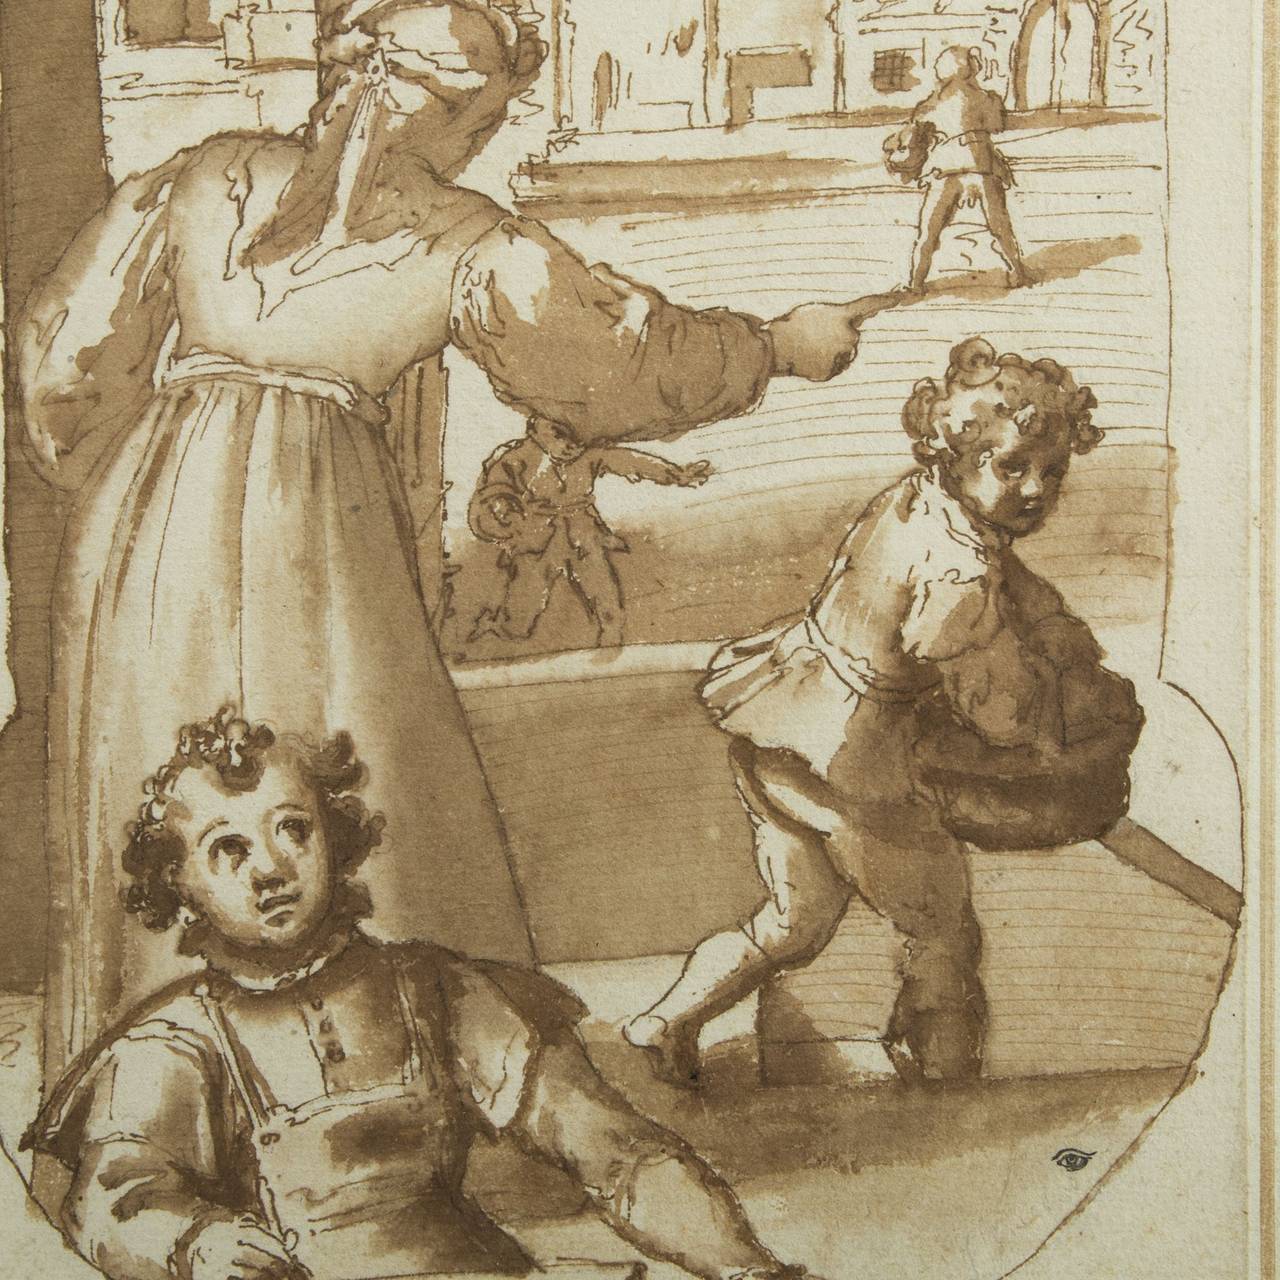 Studio of Federico ZUCCARO (circa 1543-1609)

Childhood Scene of Taddeo Zuccaro

Pen, brown ink, brown wash and black pencil tracing on beige paper. Fully glued on British mounting.

Several collection seals:
- Nathaniel HONE (1718-1784),